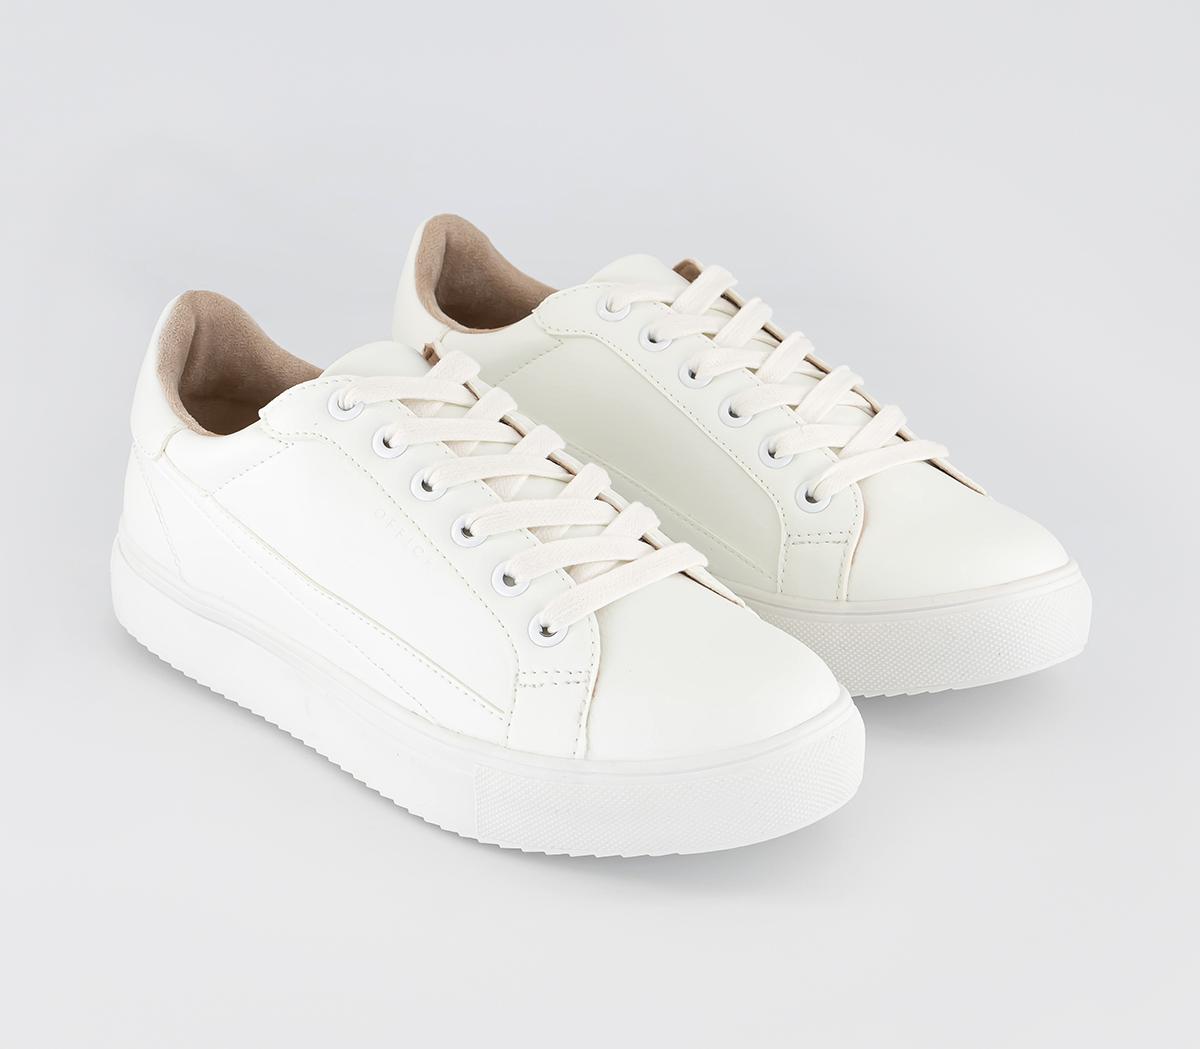 OFFICE Free Spirit Lace Up Trainers White - Flat Shoes for Women